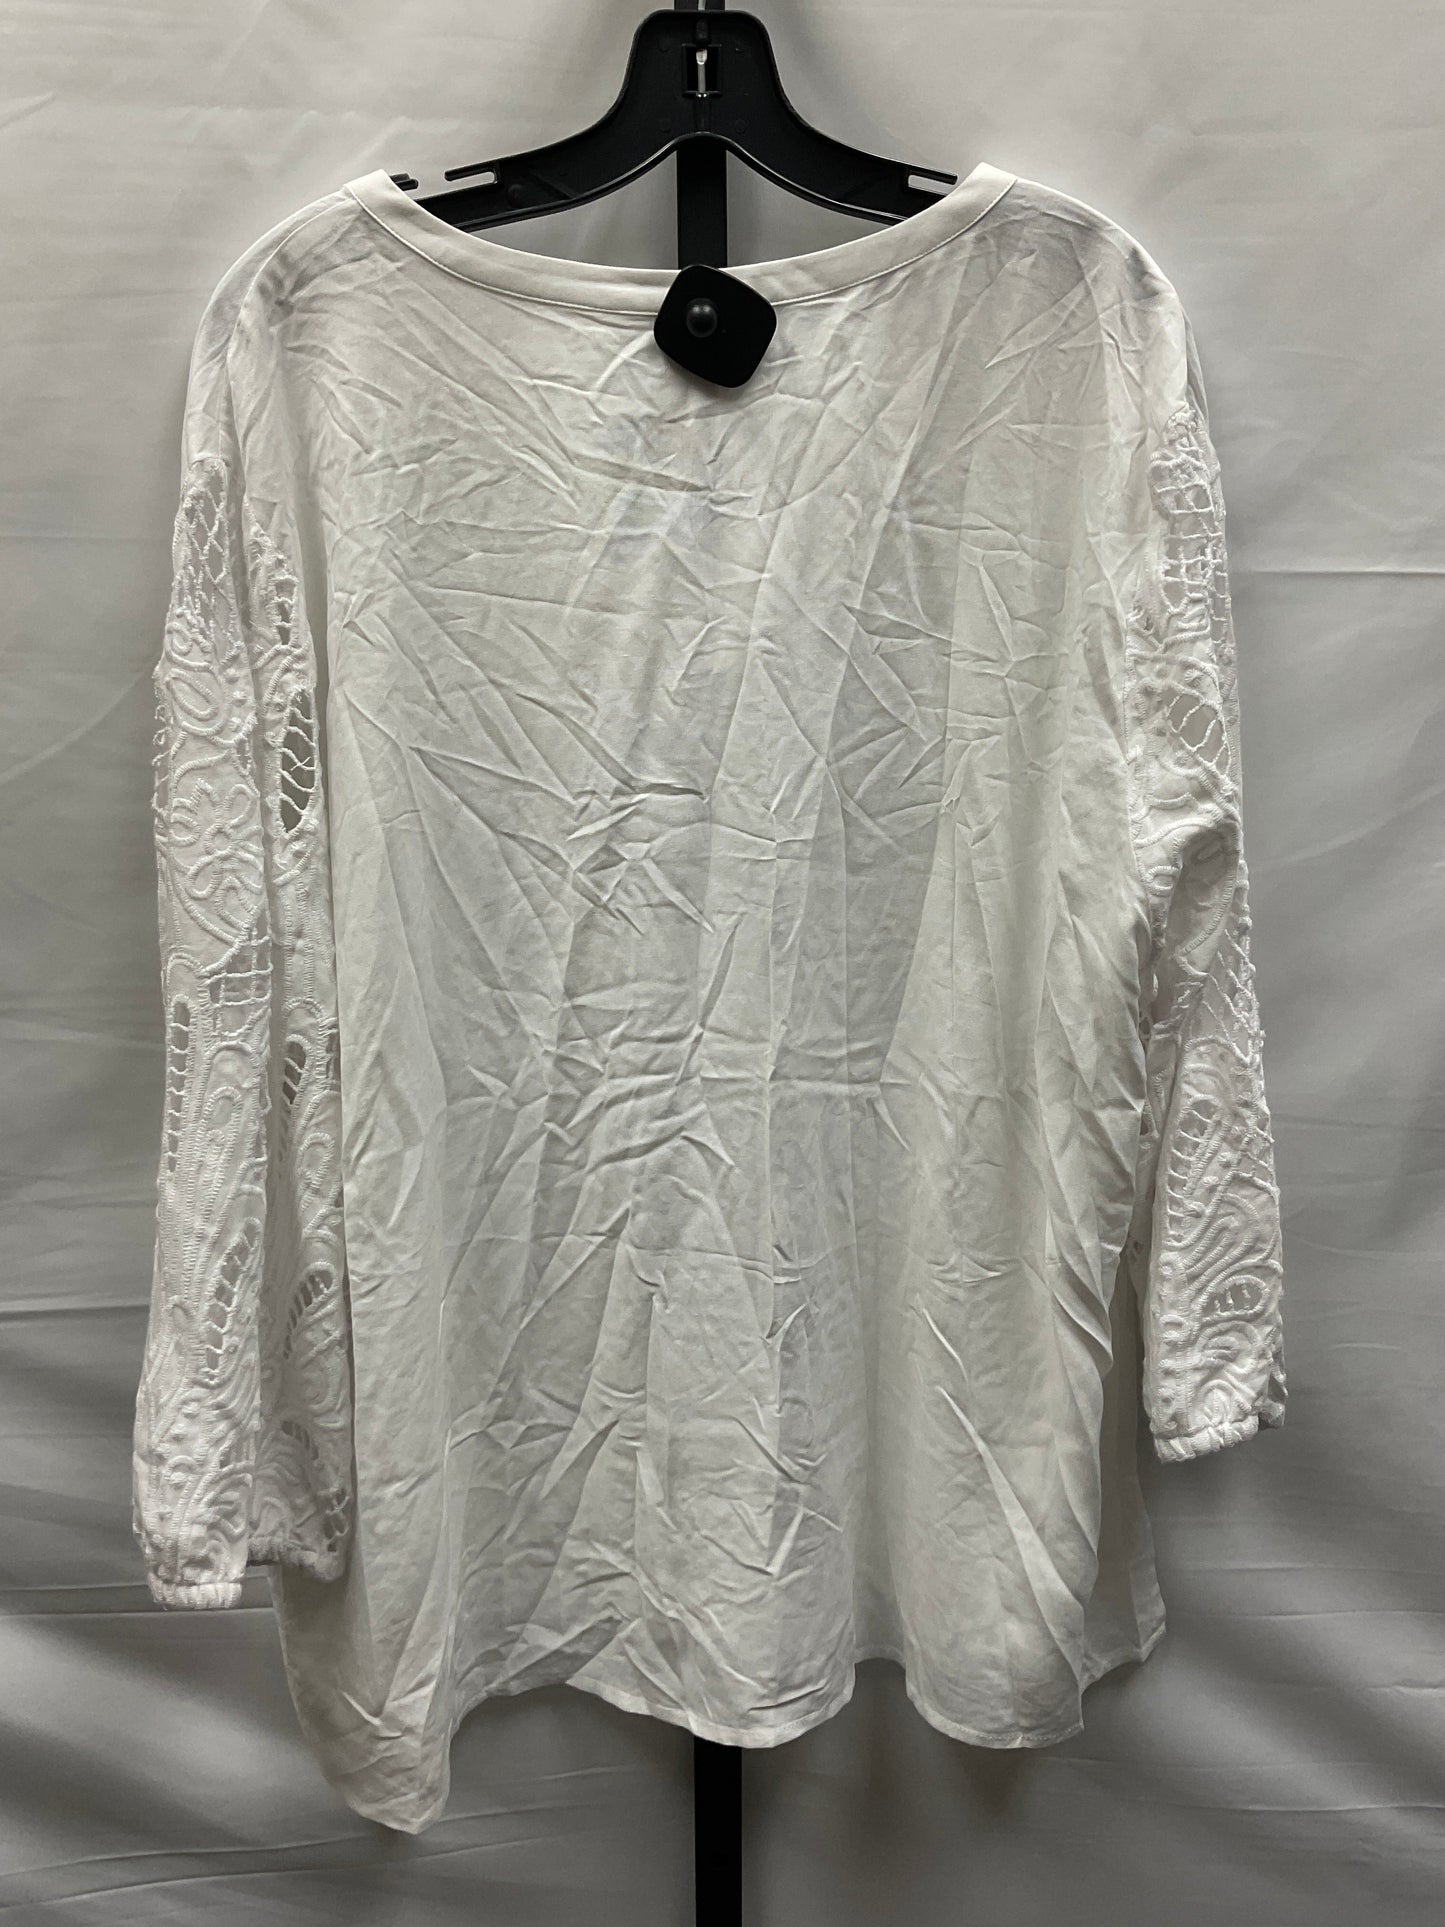 White Top Long Sleeve Chicos, Size 2x